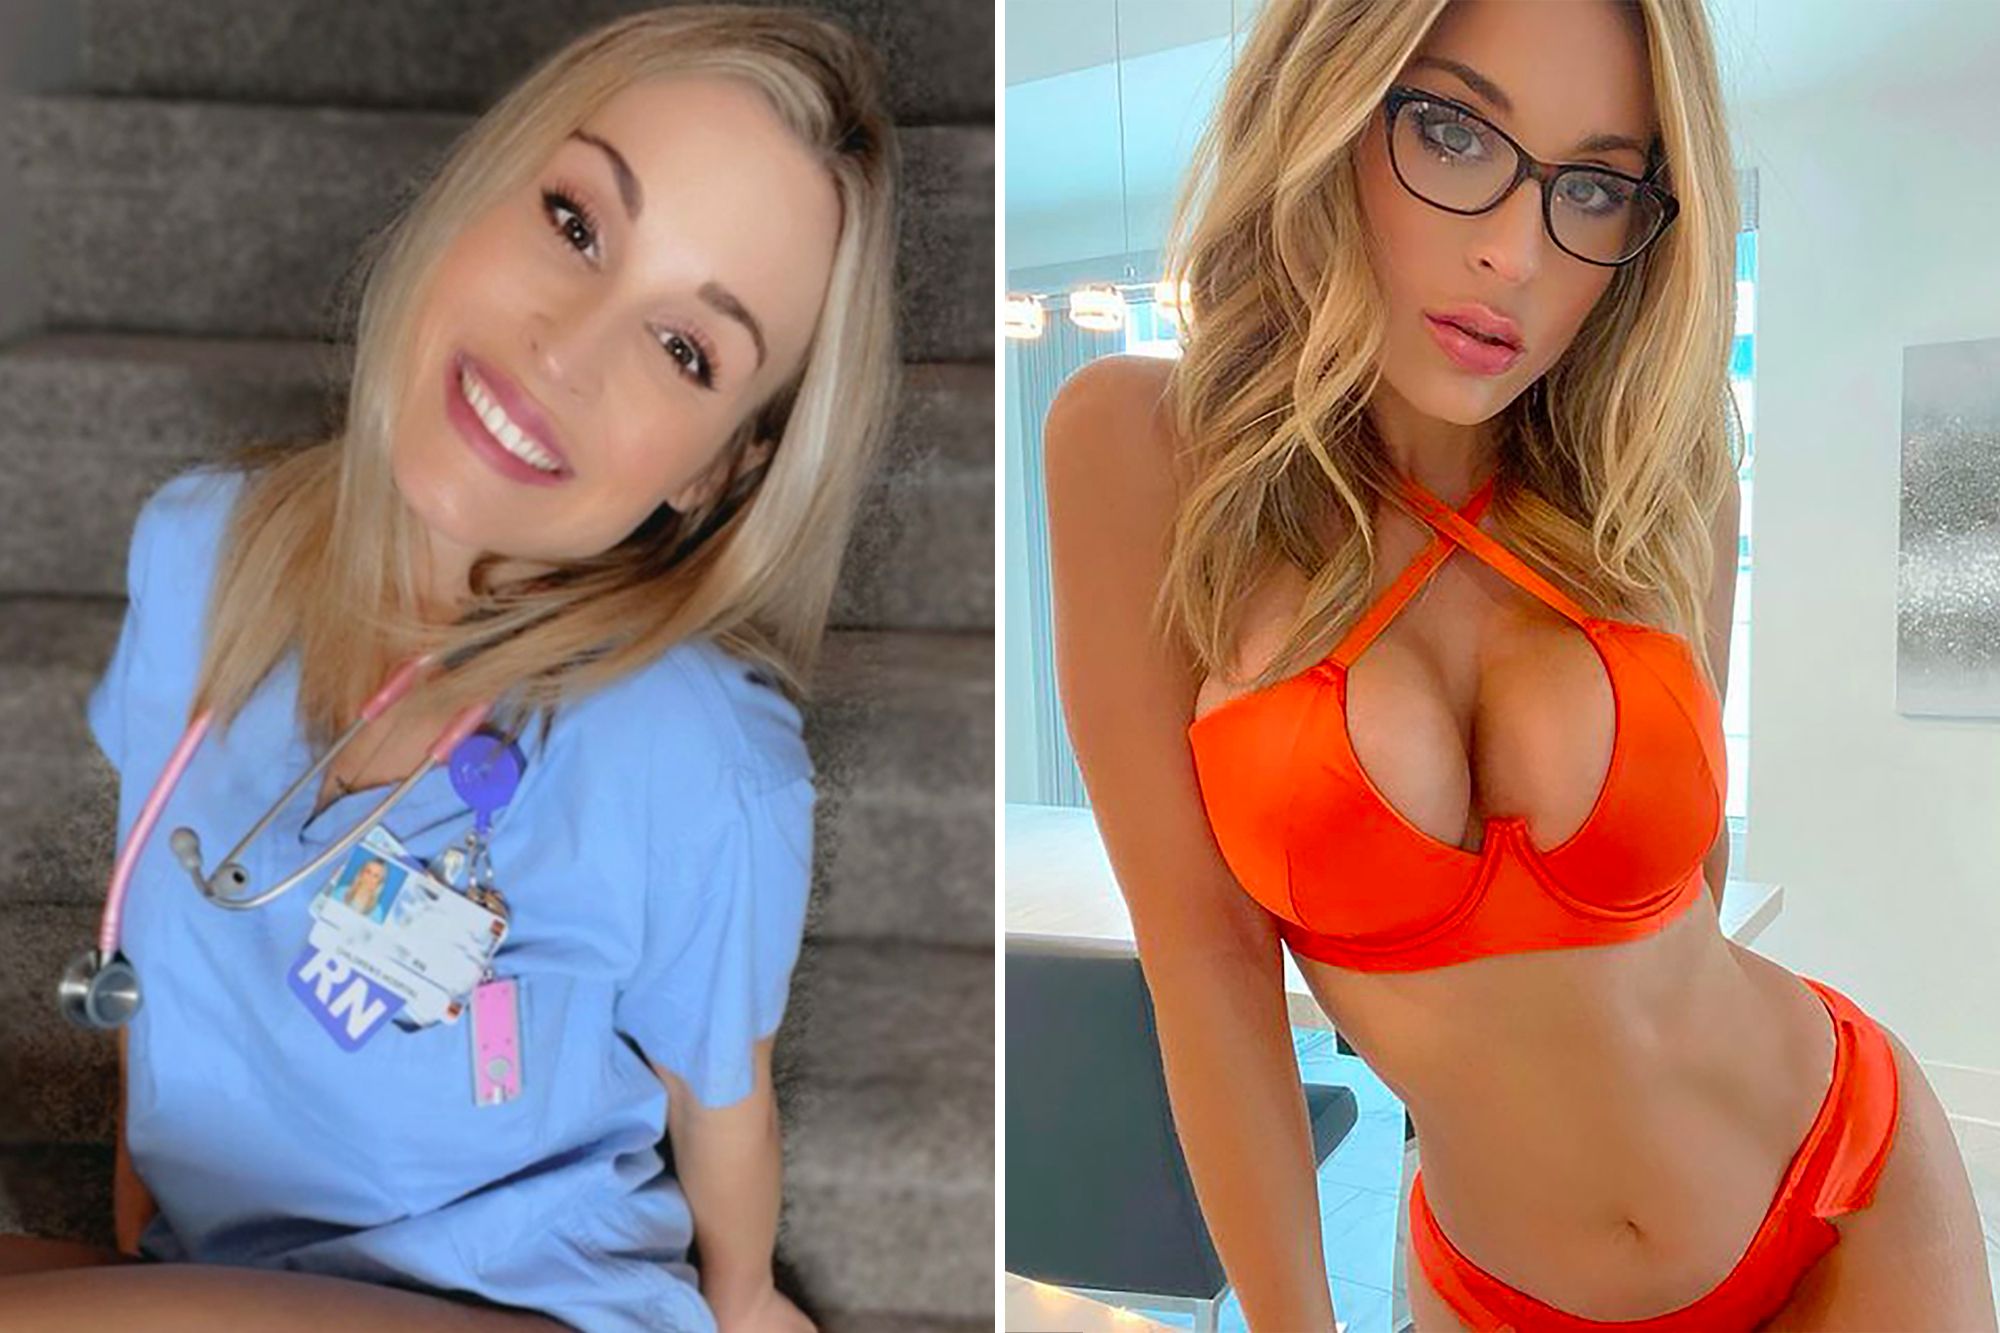 Massachusetts Mother-Of-Three Quits Her Nursing Job To Join OnlyFans, Earning Over $75,000 Per Month